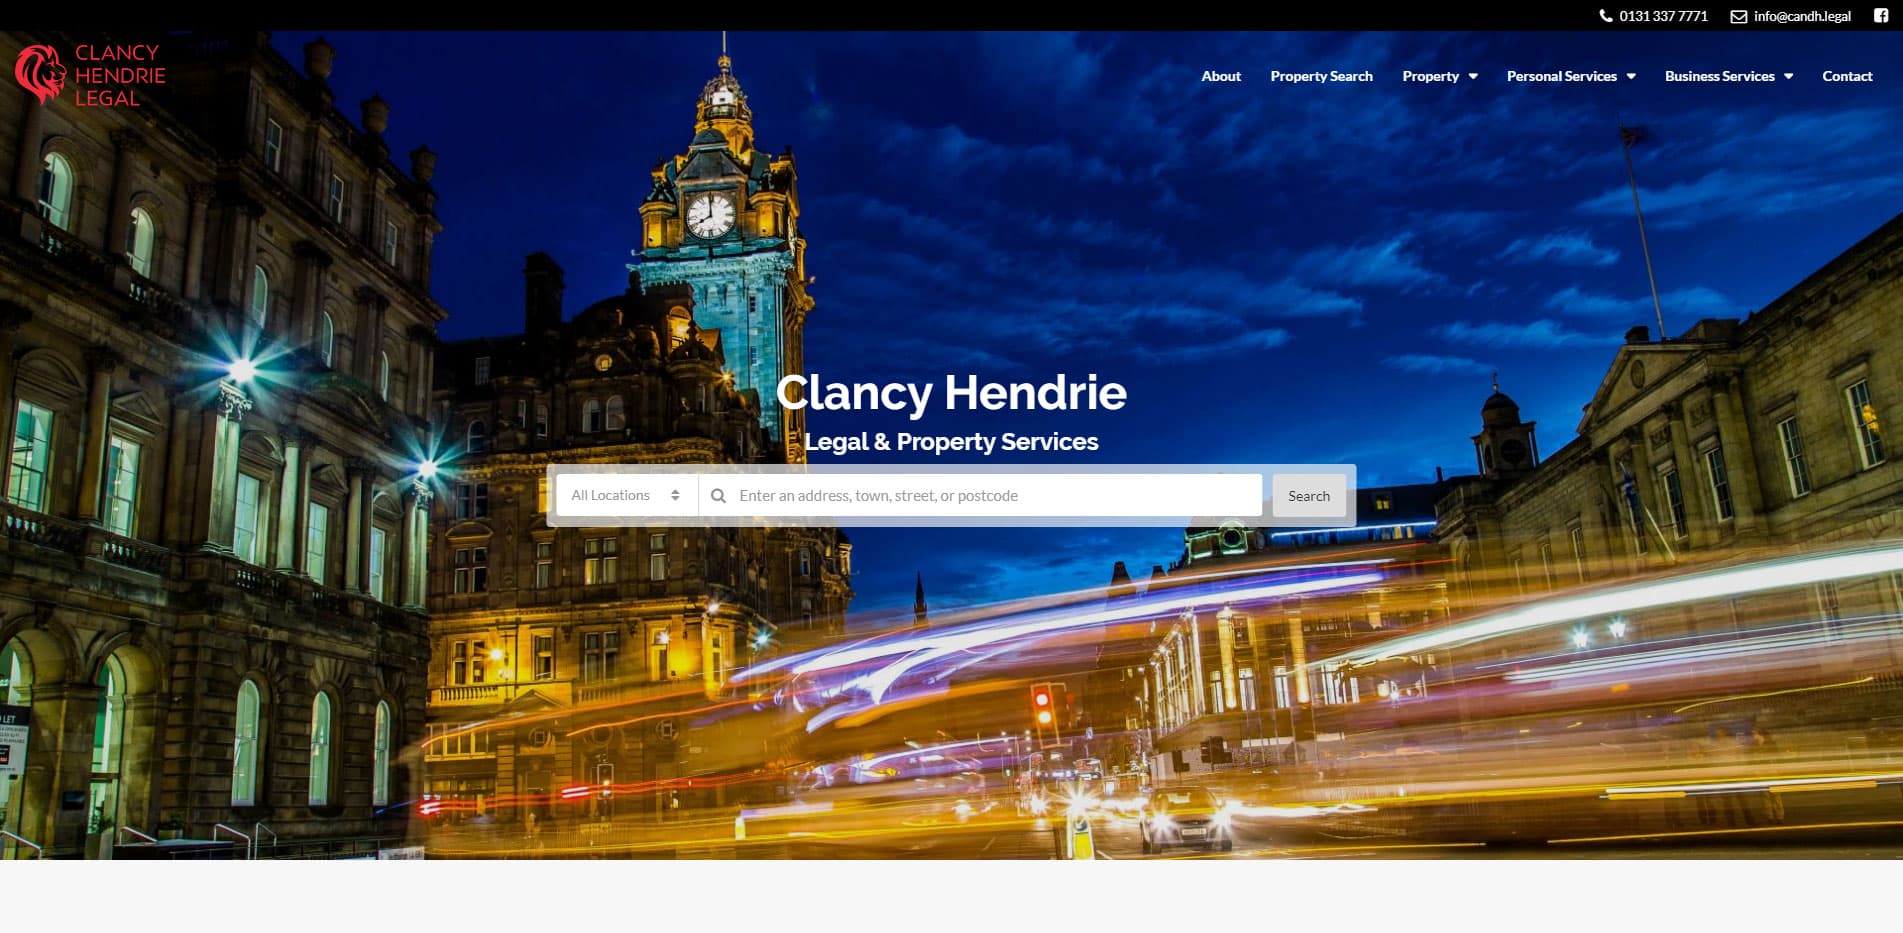 Clancy Hendrie Legal About